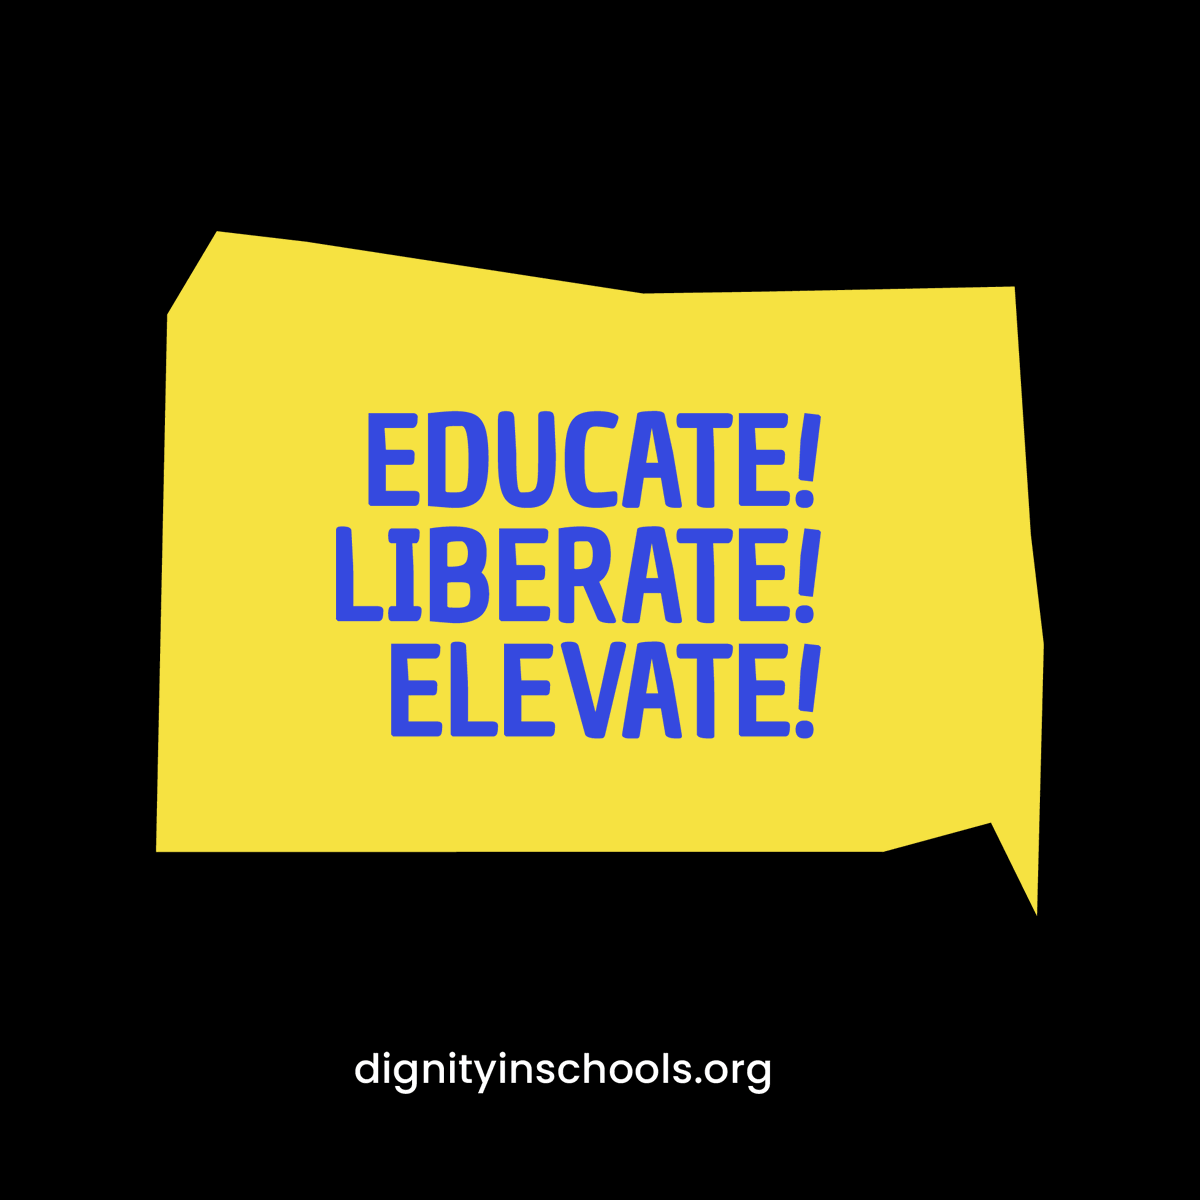 Today is the day! Join us at 6PM EST  for our discussion on the intersectionality between access to healthcare, education & the school-to-prison pipeline. 

in-person Location: 726 Broadway

or zoom: bit.ly/ForumOct2023

#DSCWoA2023 #EducateLiberateElevate #PassNYHealth